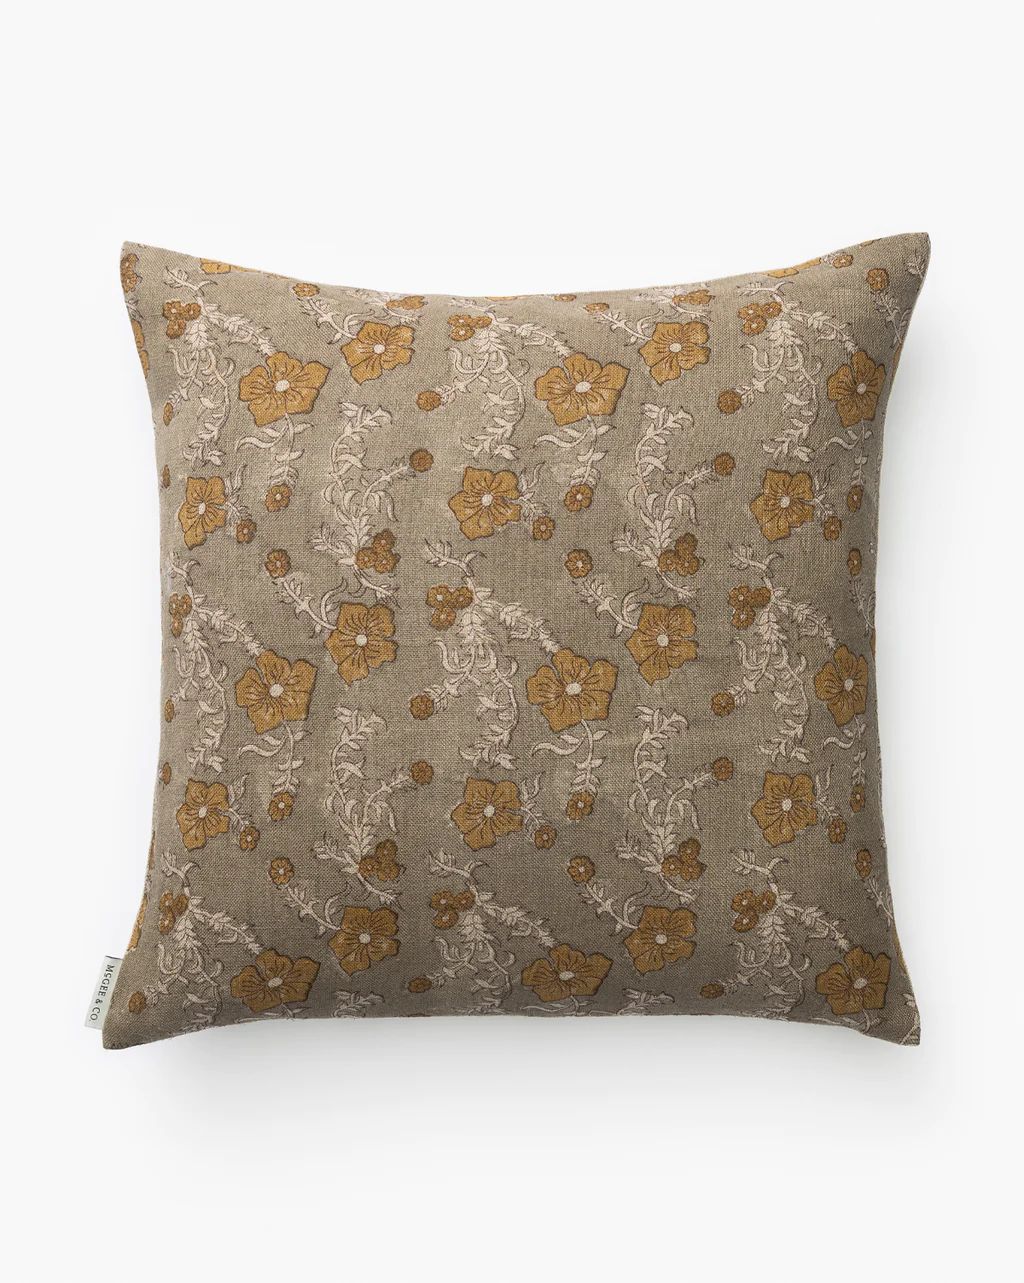 Orchid Floral Pillow Cover | McGee & Co.